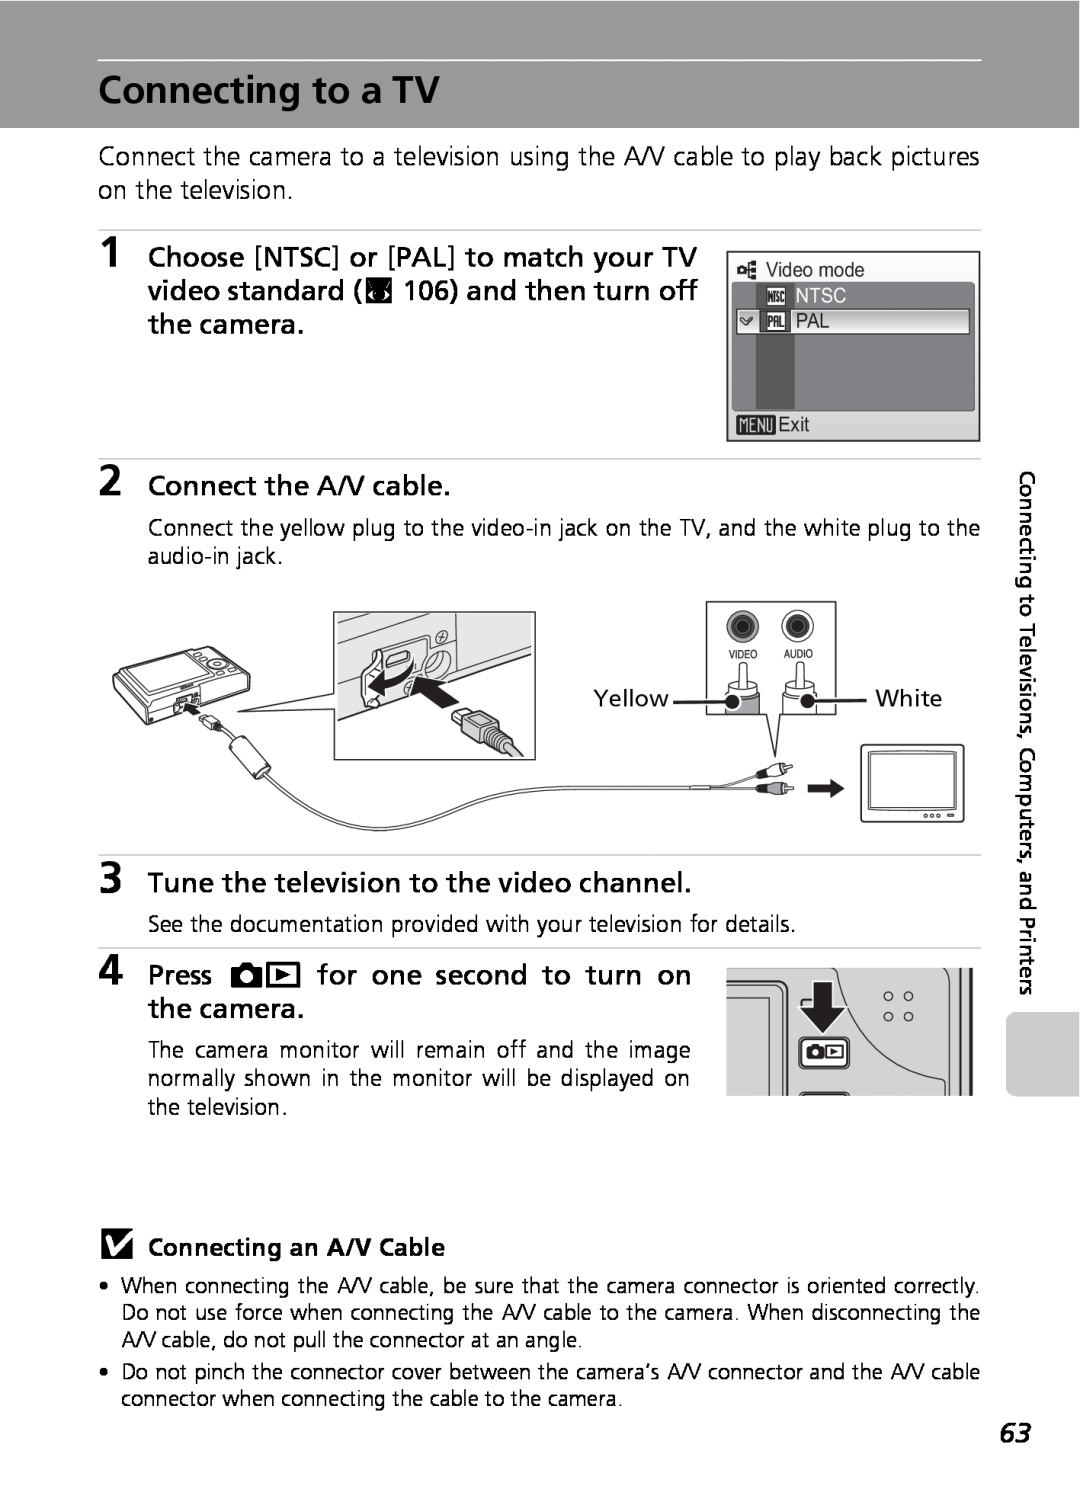 Nikon COOLPIXS9 manual Connecting to a TV, Connect the A/V cable, Tune the television to the video channel 